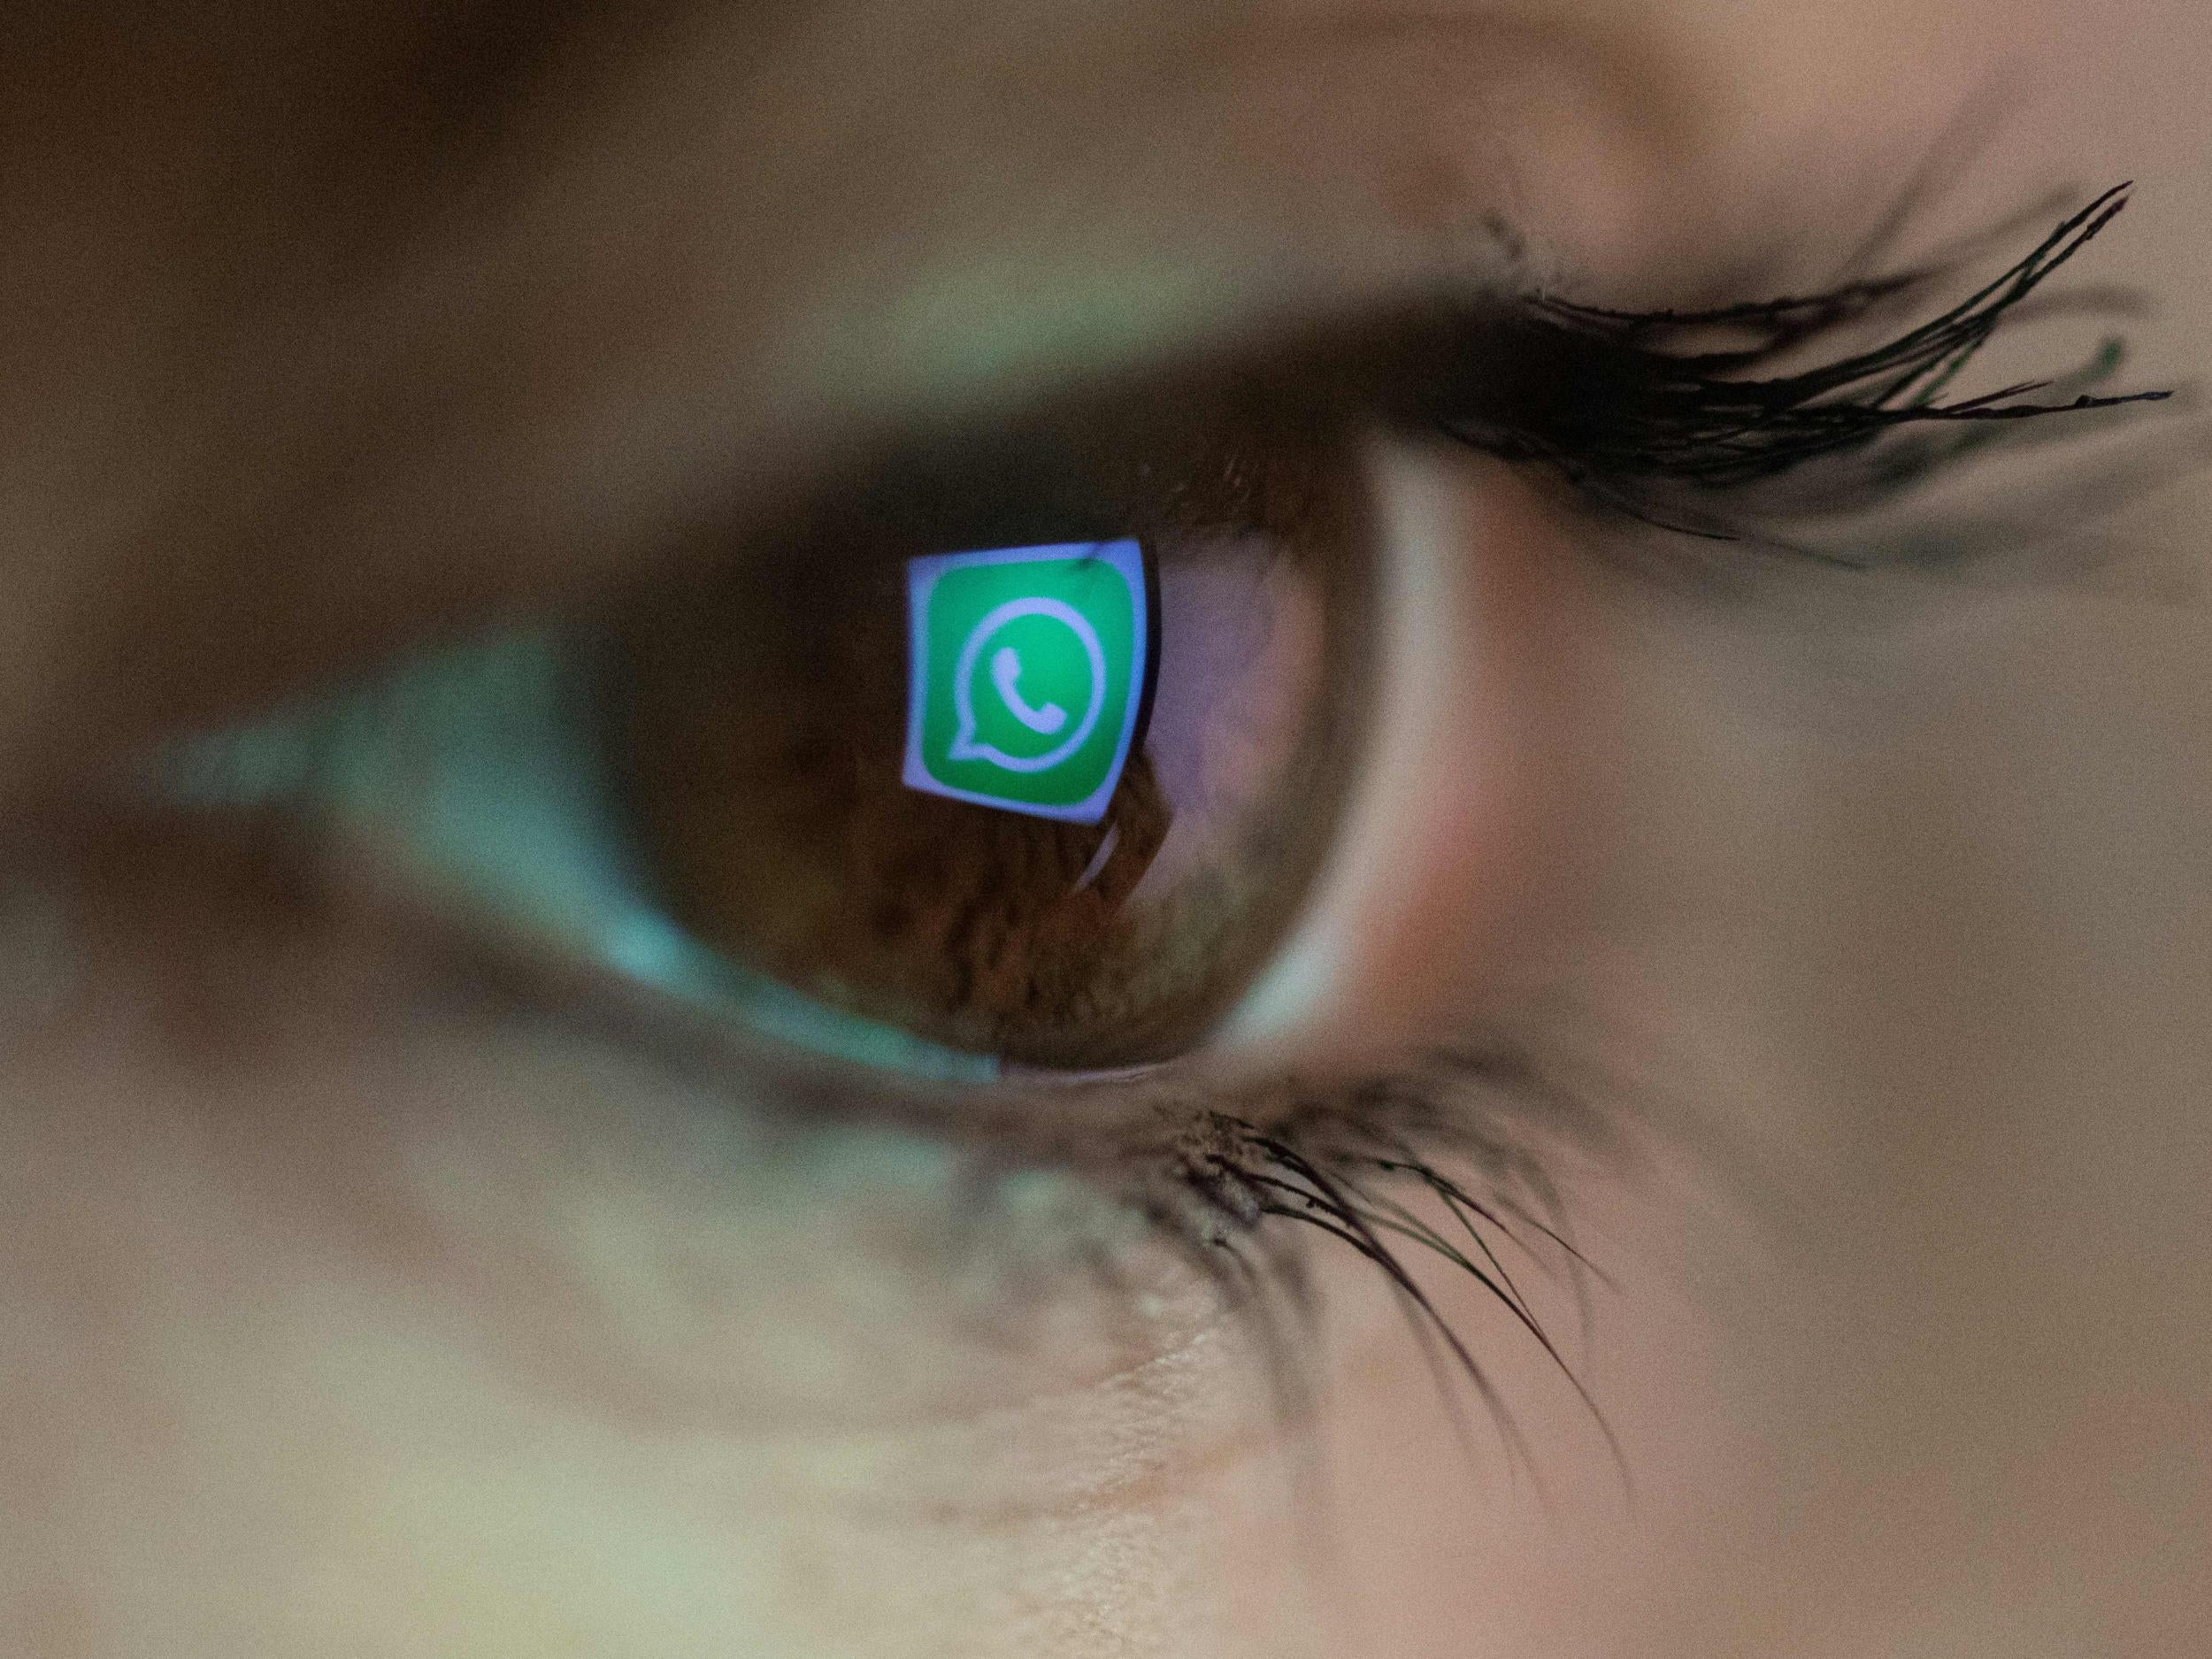 Sex In Chaild - WhatsApp is hotbed for child sex abuse videos in India, study ...